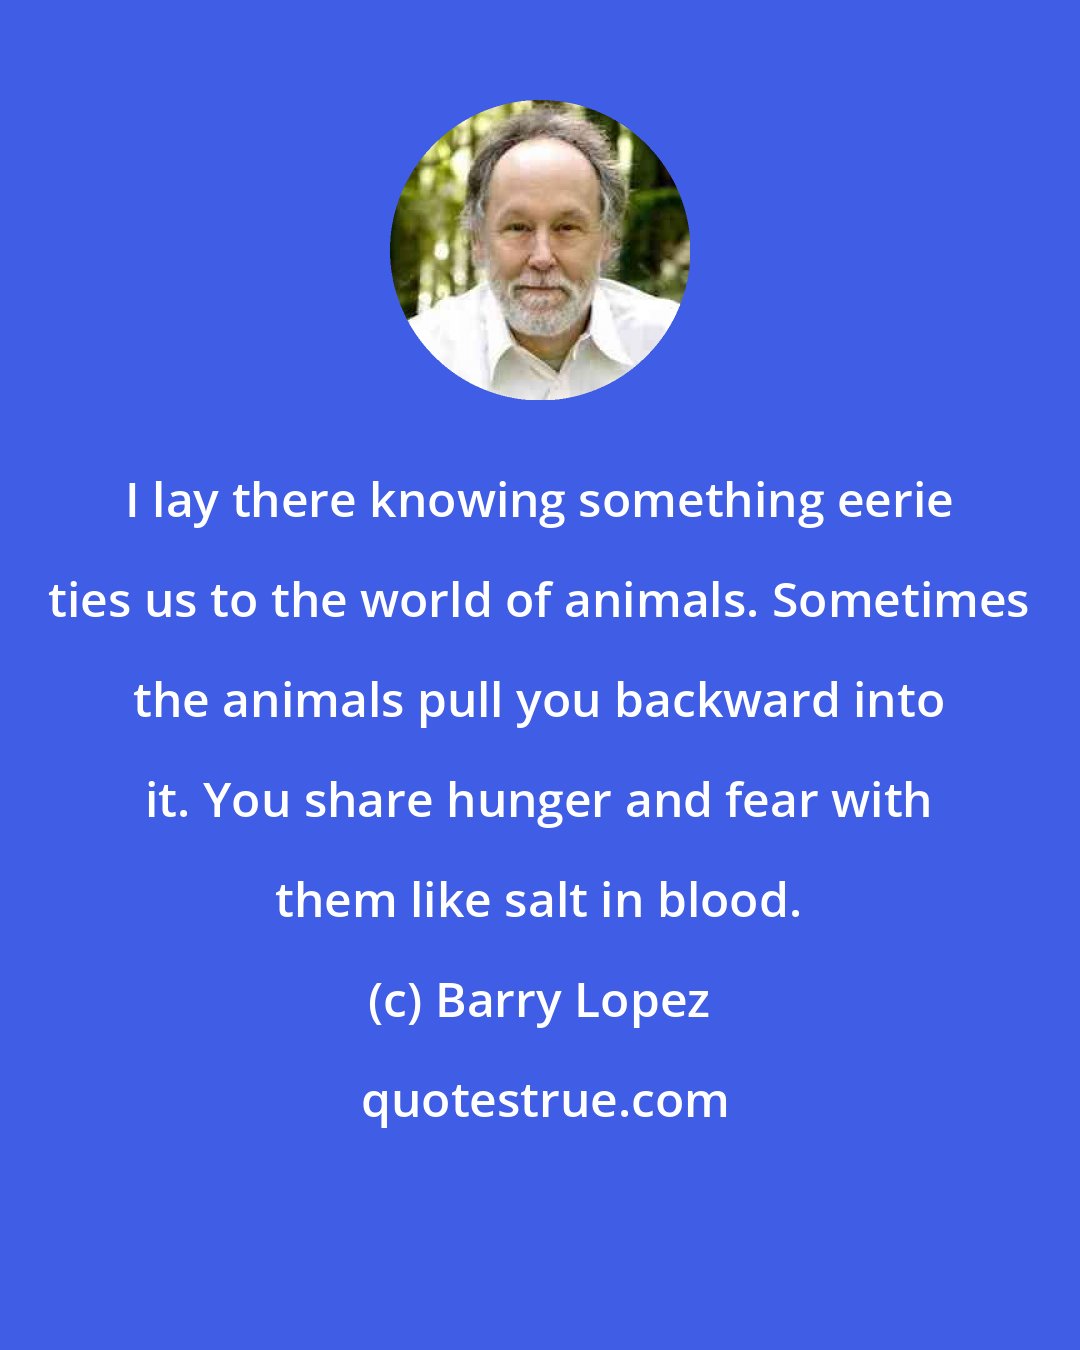 Barry Lopez: I lay there knowing something eerie ties us to the world of animals. Sometimes the animals pull you backward into it. You share hunger and fear with them like salt in blood.